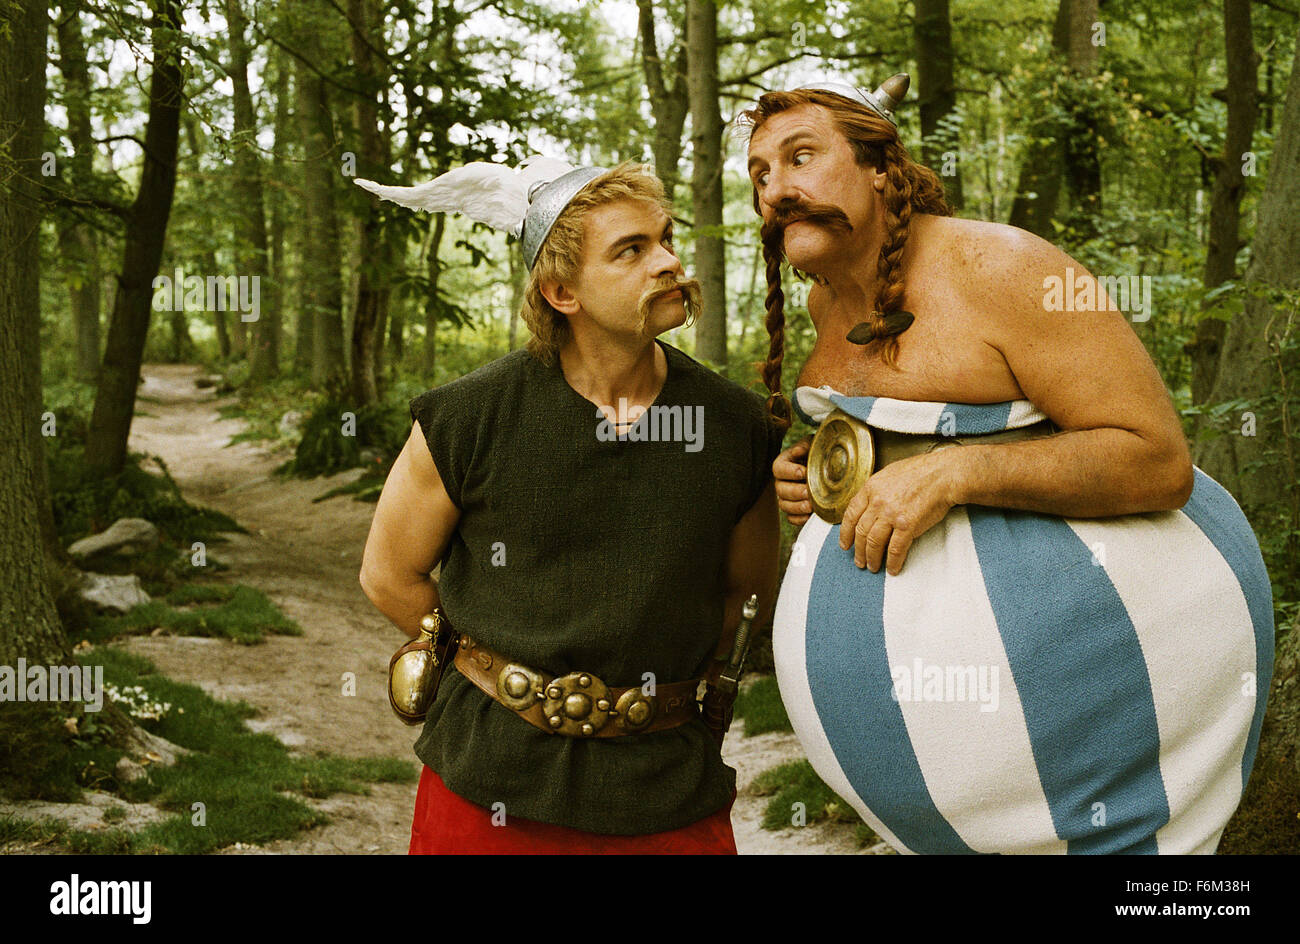 RELEASE DATE: February 1, 2008. MOVIE TITLE: Asterix at the Olympic Games aka Asterix aux jeux olympiques. STUDIO: Pathe Renn Productions. PLOT: Comedy about first Olympic Games in Rome. PICTURED:  CLOVIS CORNILLAC as Asterix and GERARD DEPARDIEU as Obelix. Stock Photo